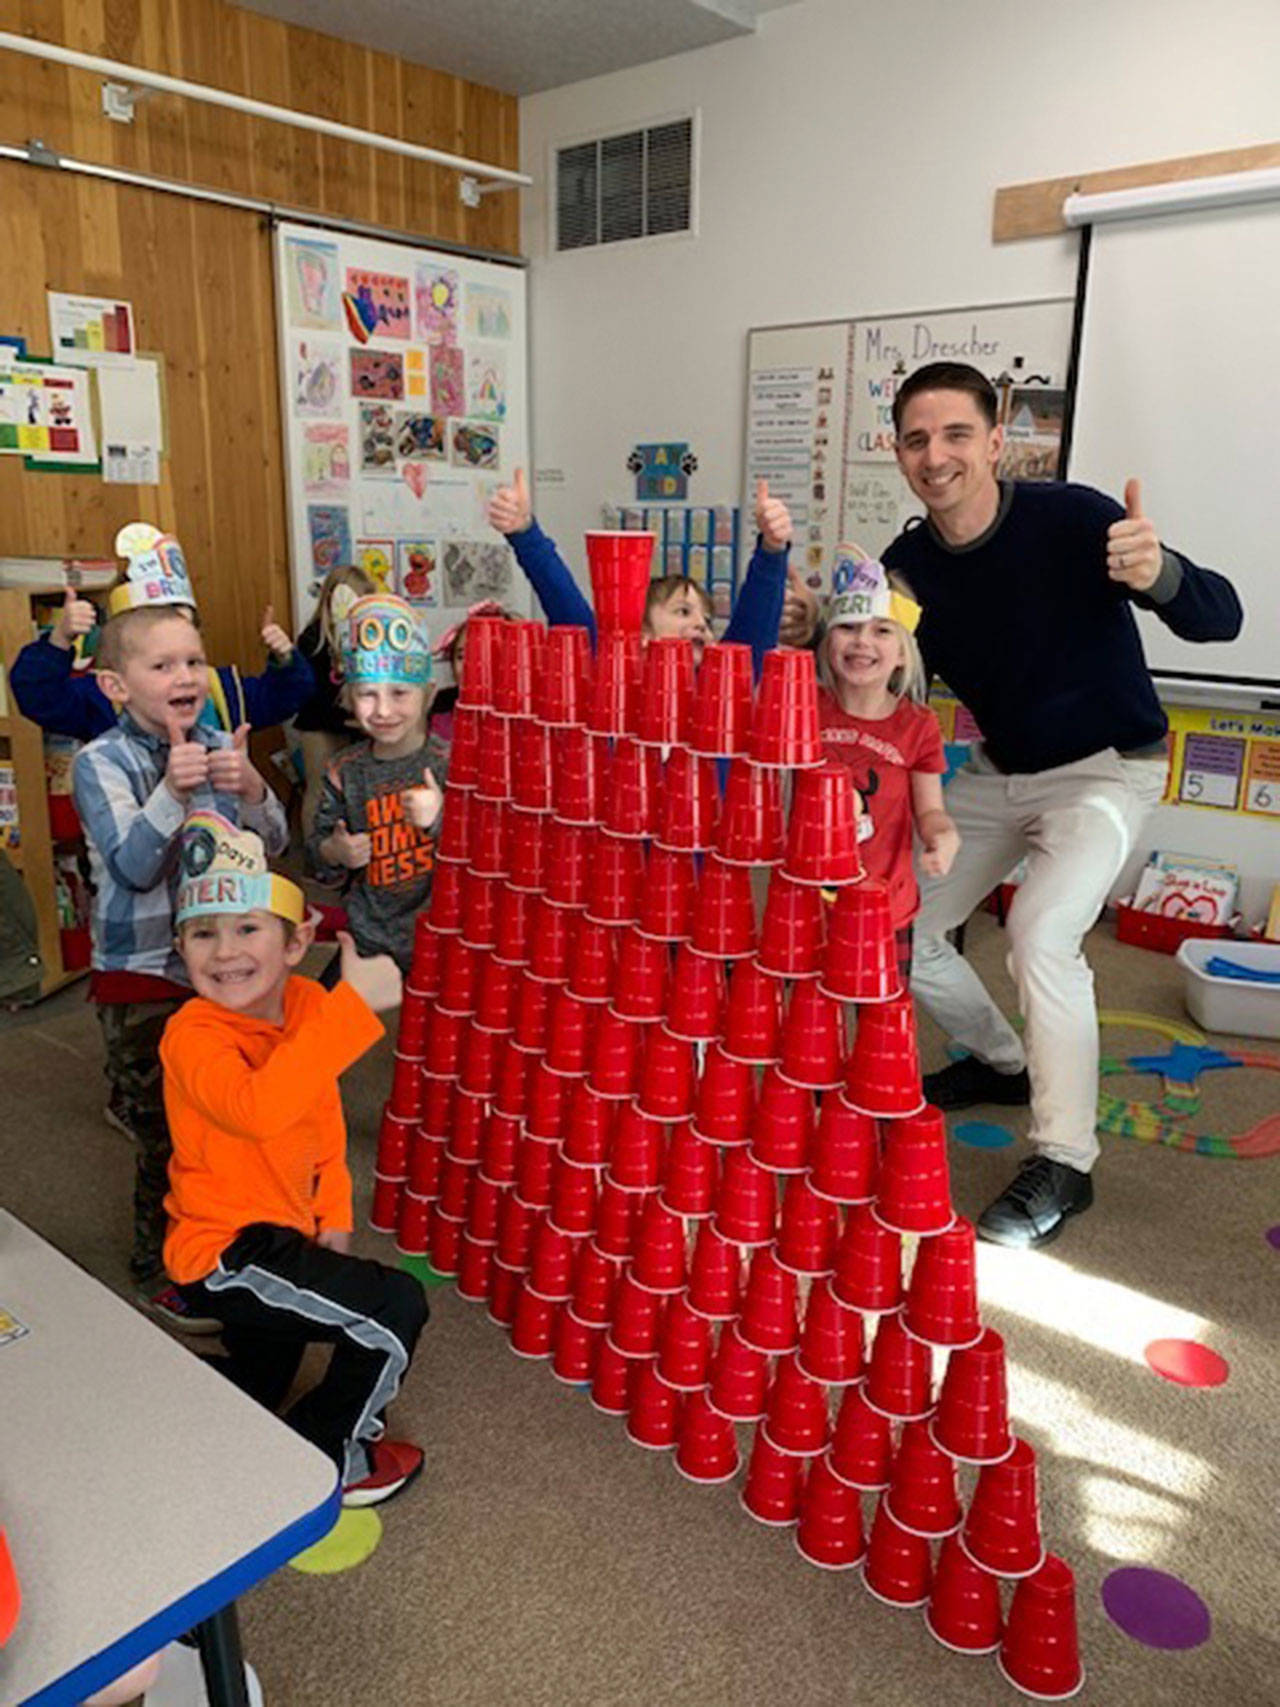 Greywolf kindergarten students Carter Gillaspy, A.J. Lawson, Mason Endicott, Lucas Windrich, and Nevaeh McNeill — pictured here with teacher Sean O’Mera — celebrate the 100th day of school by stacking 100 cups. Photo by Carla Drescher